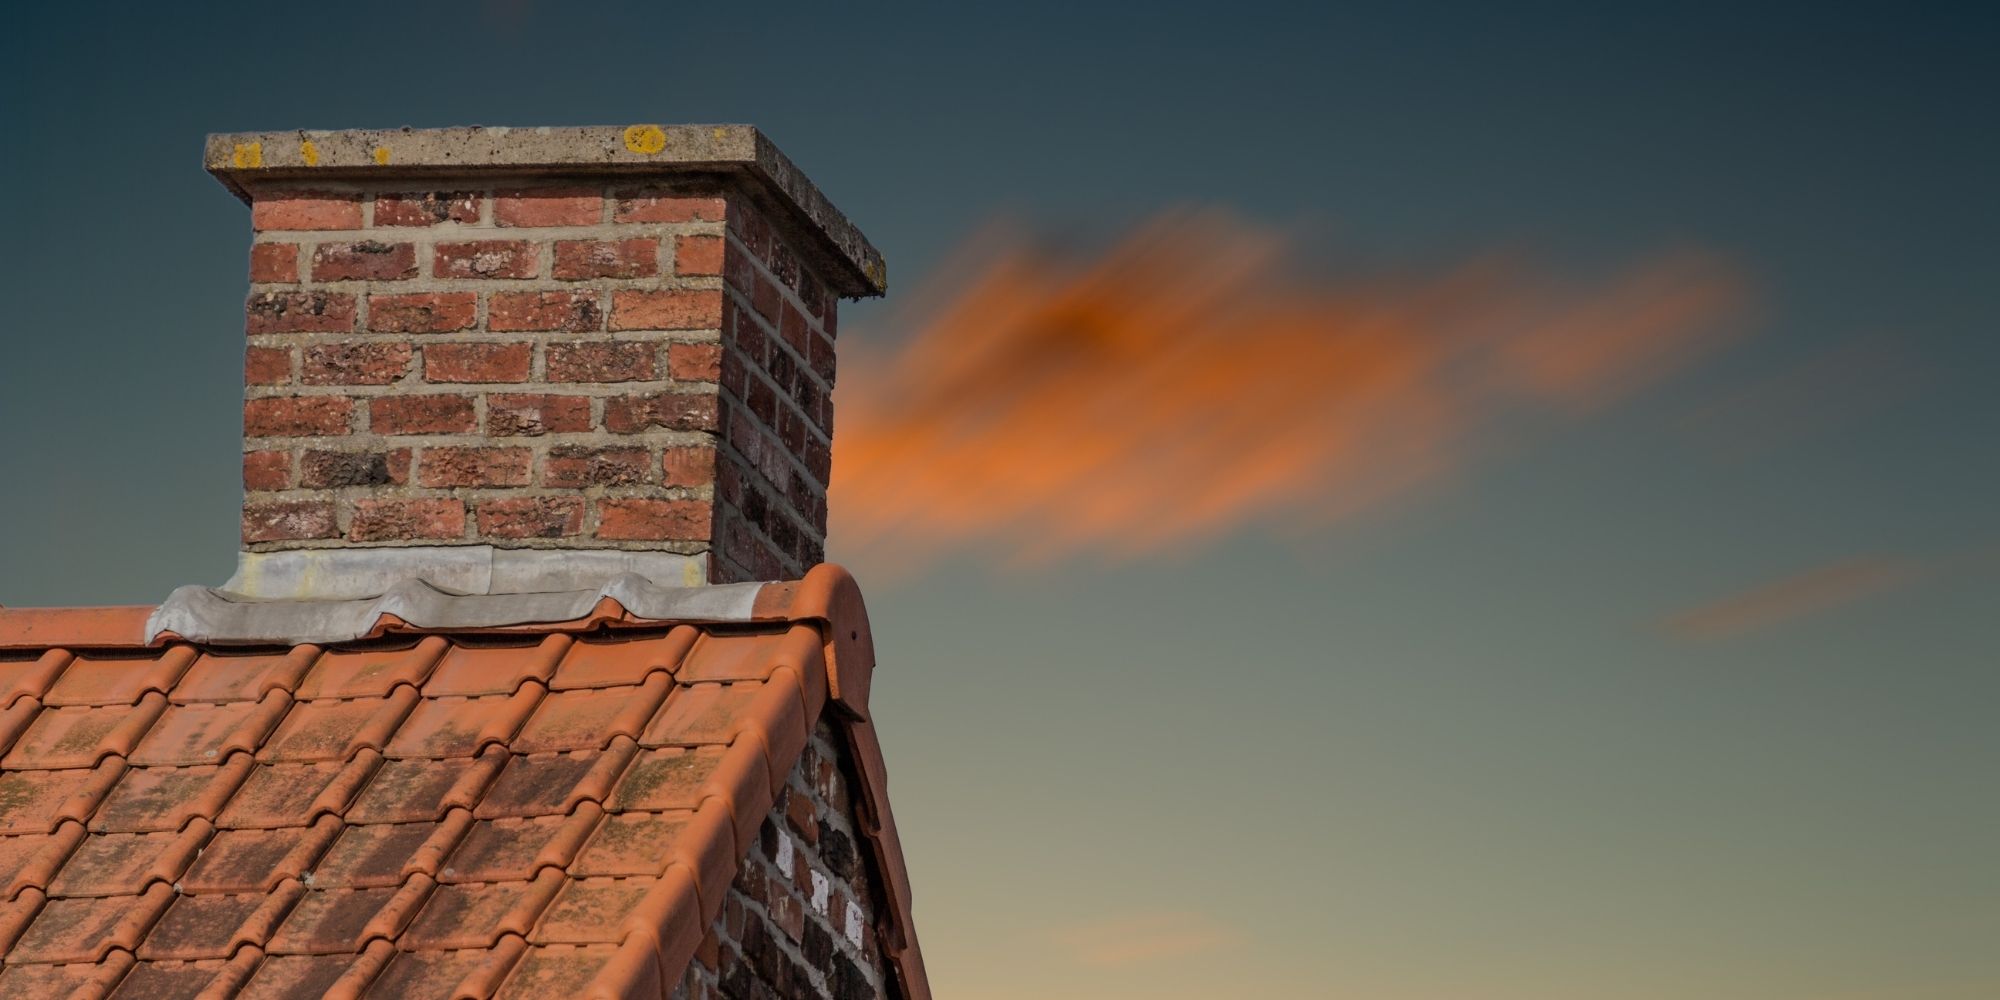 Chimney as the sun sets